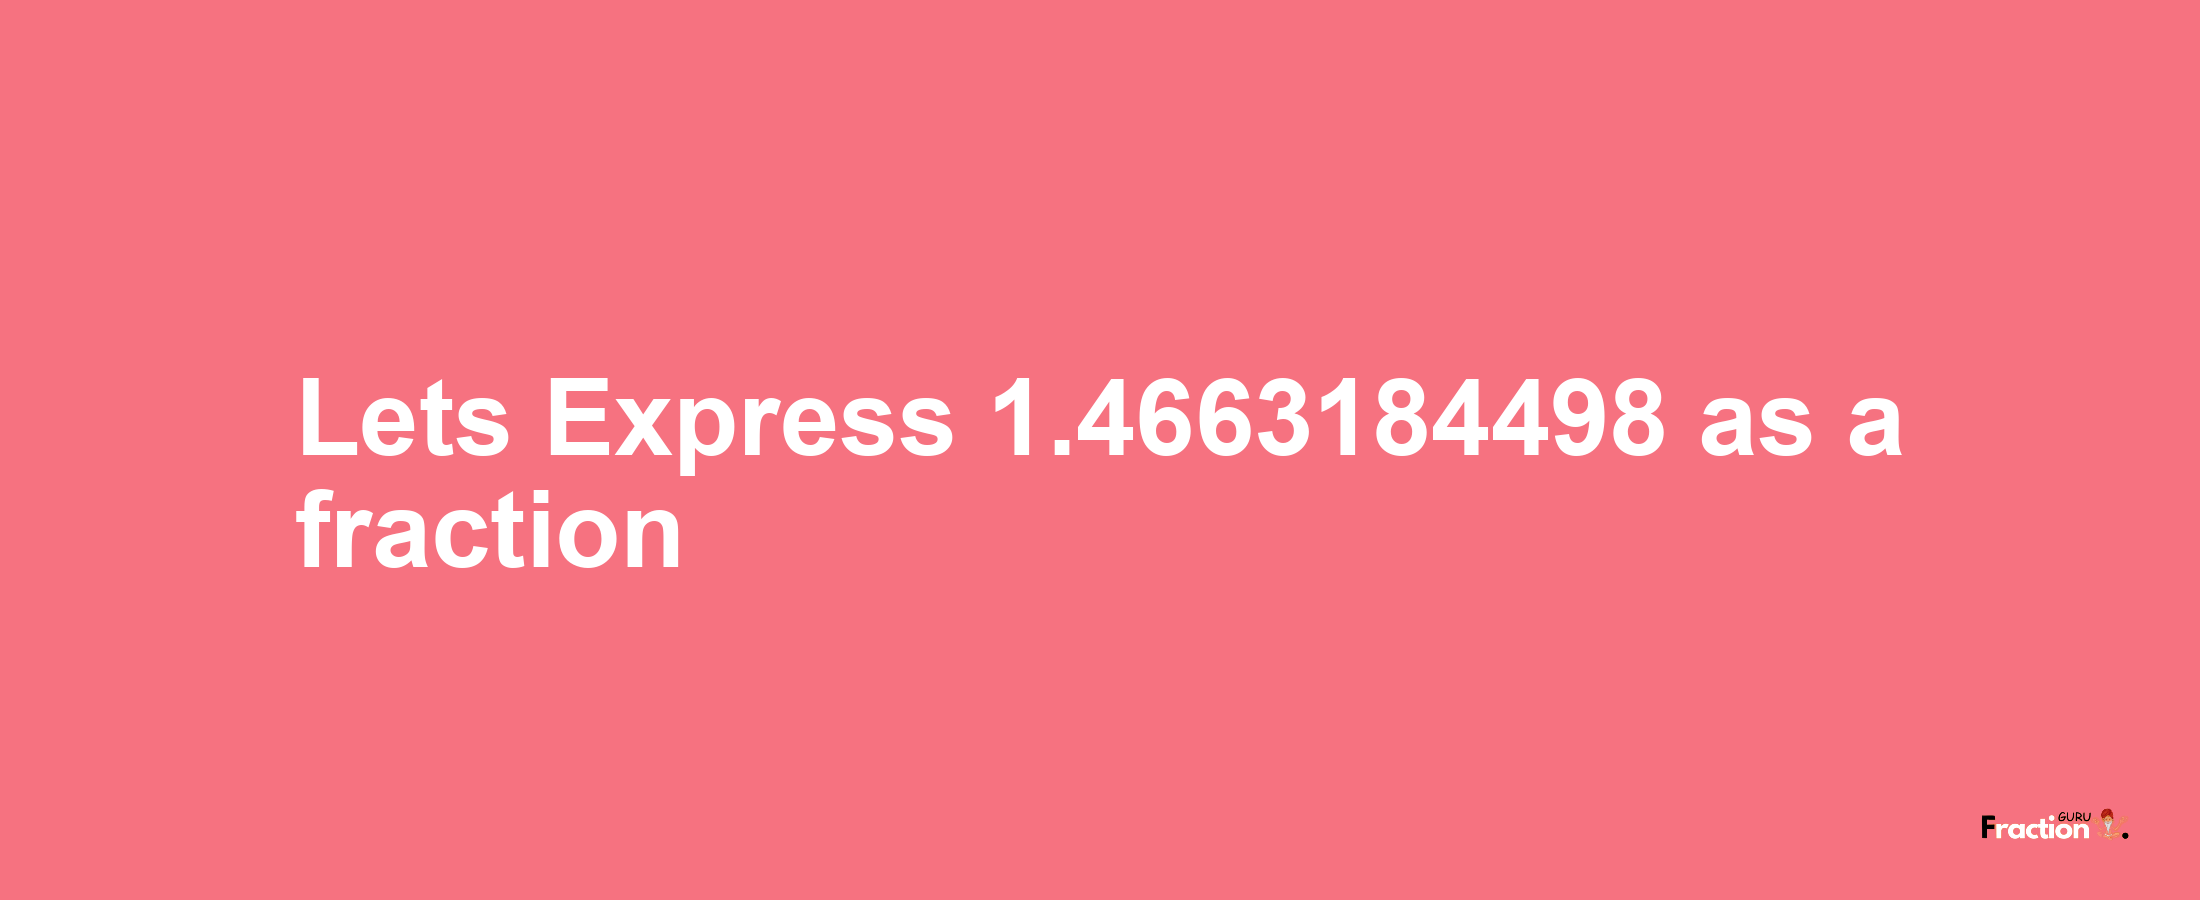 Lets Express 1.4663184498 as afraction